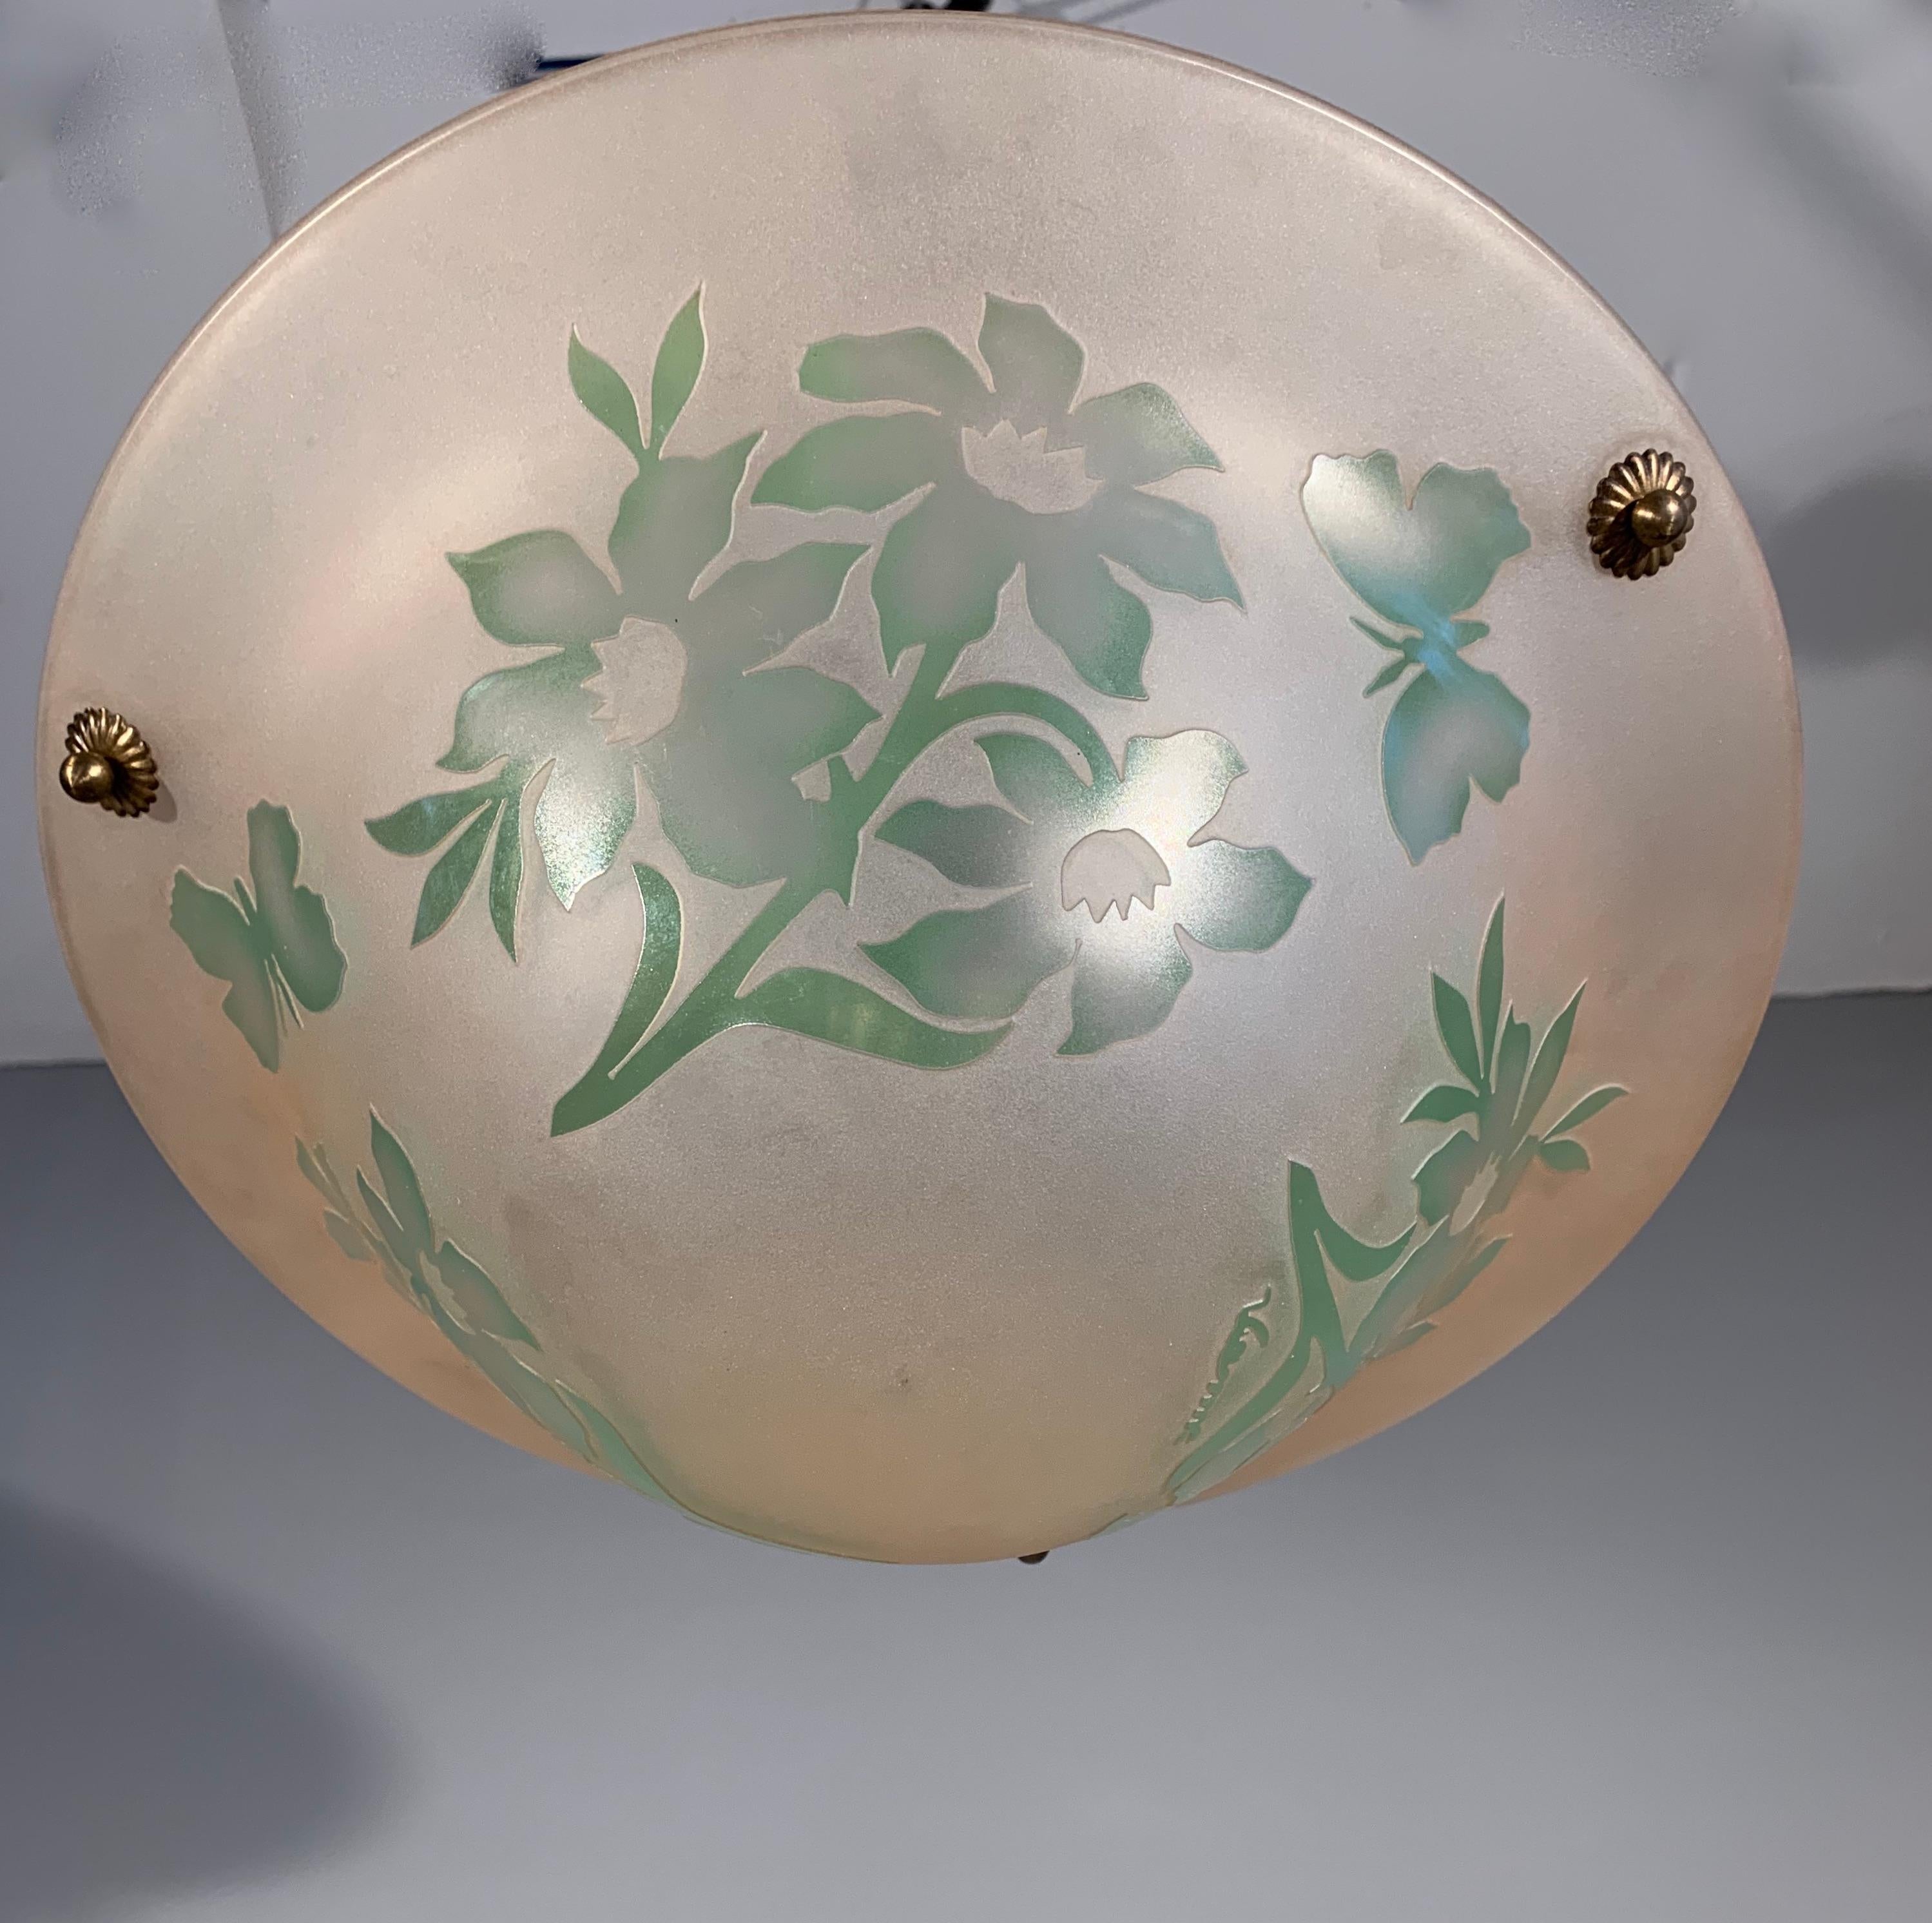 Unique and stunning work of lighting art.

If you are passionate about early 20th century decorative art then you will love this one of a kind, art glass light fixture. What you are seeing here is an extremely rare, acid etched pendant, signed by